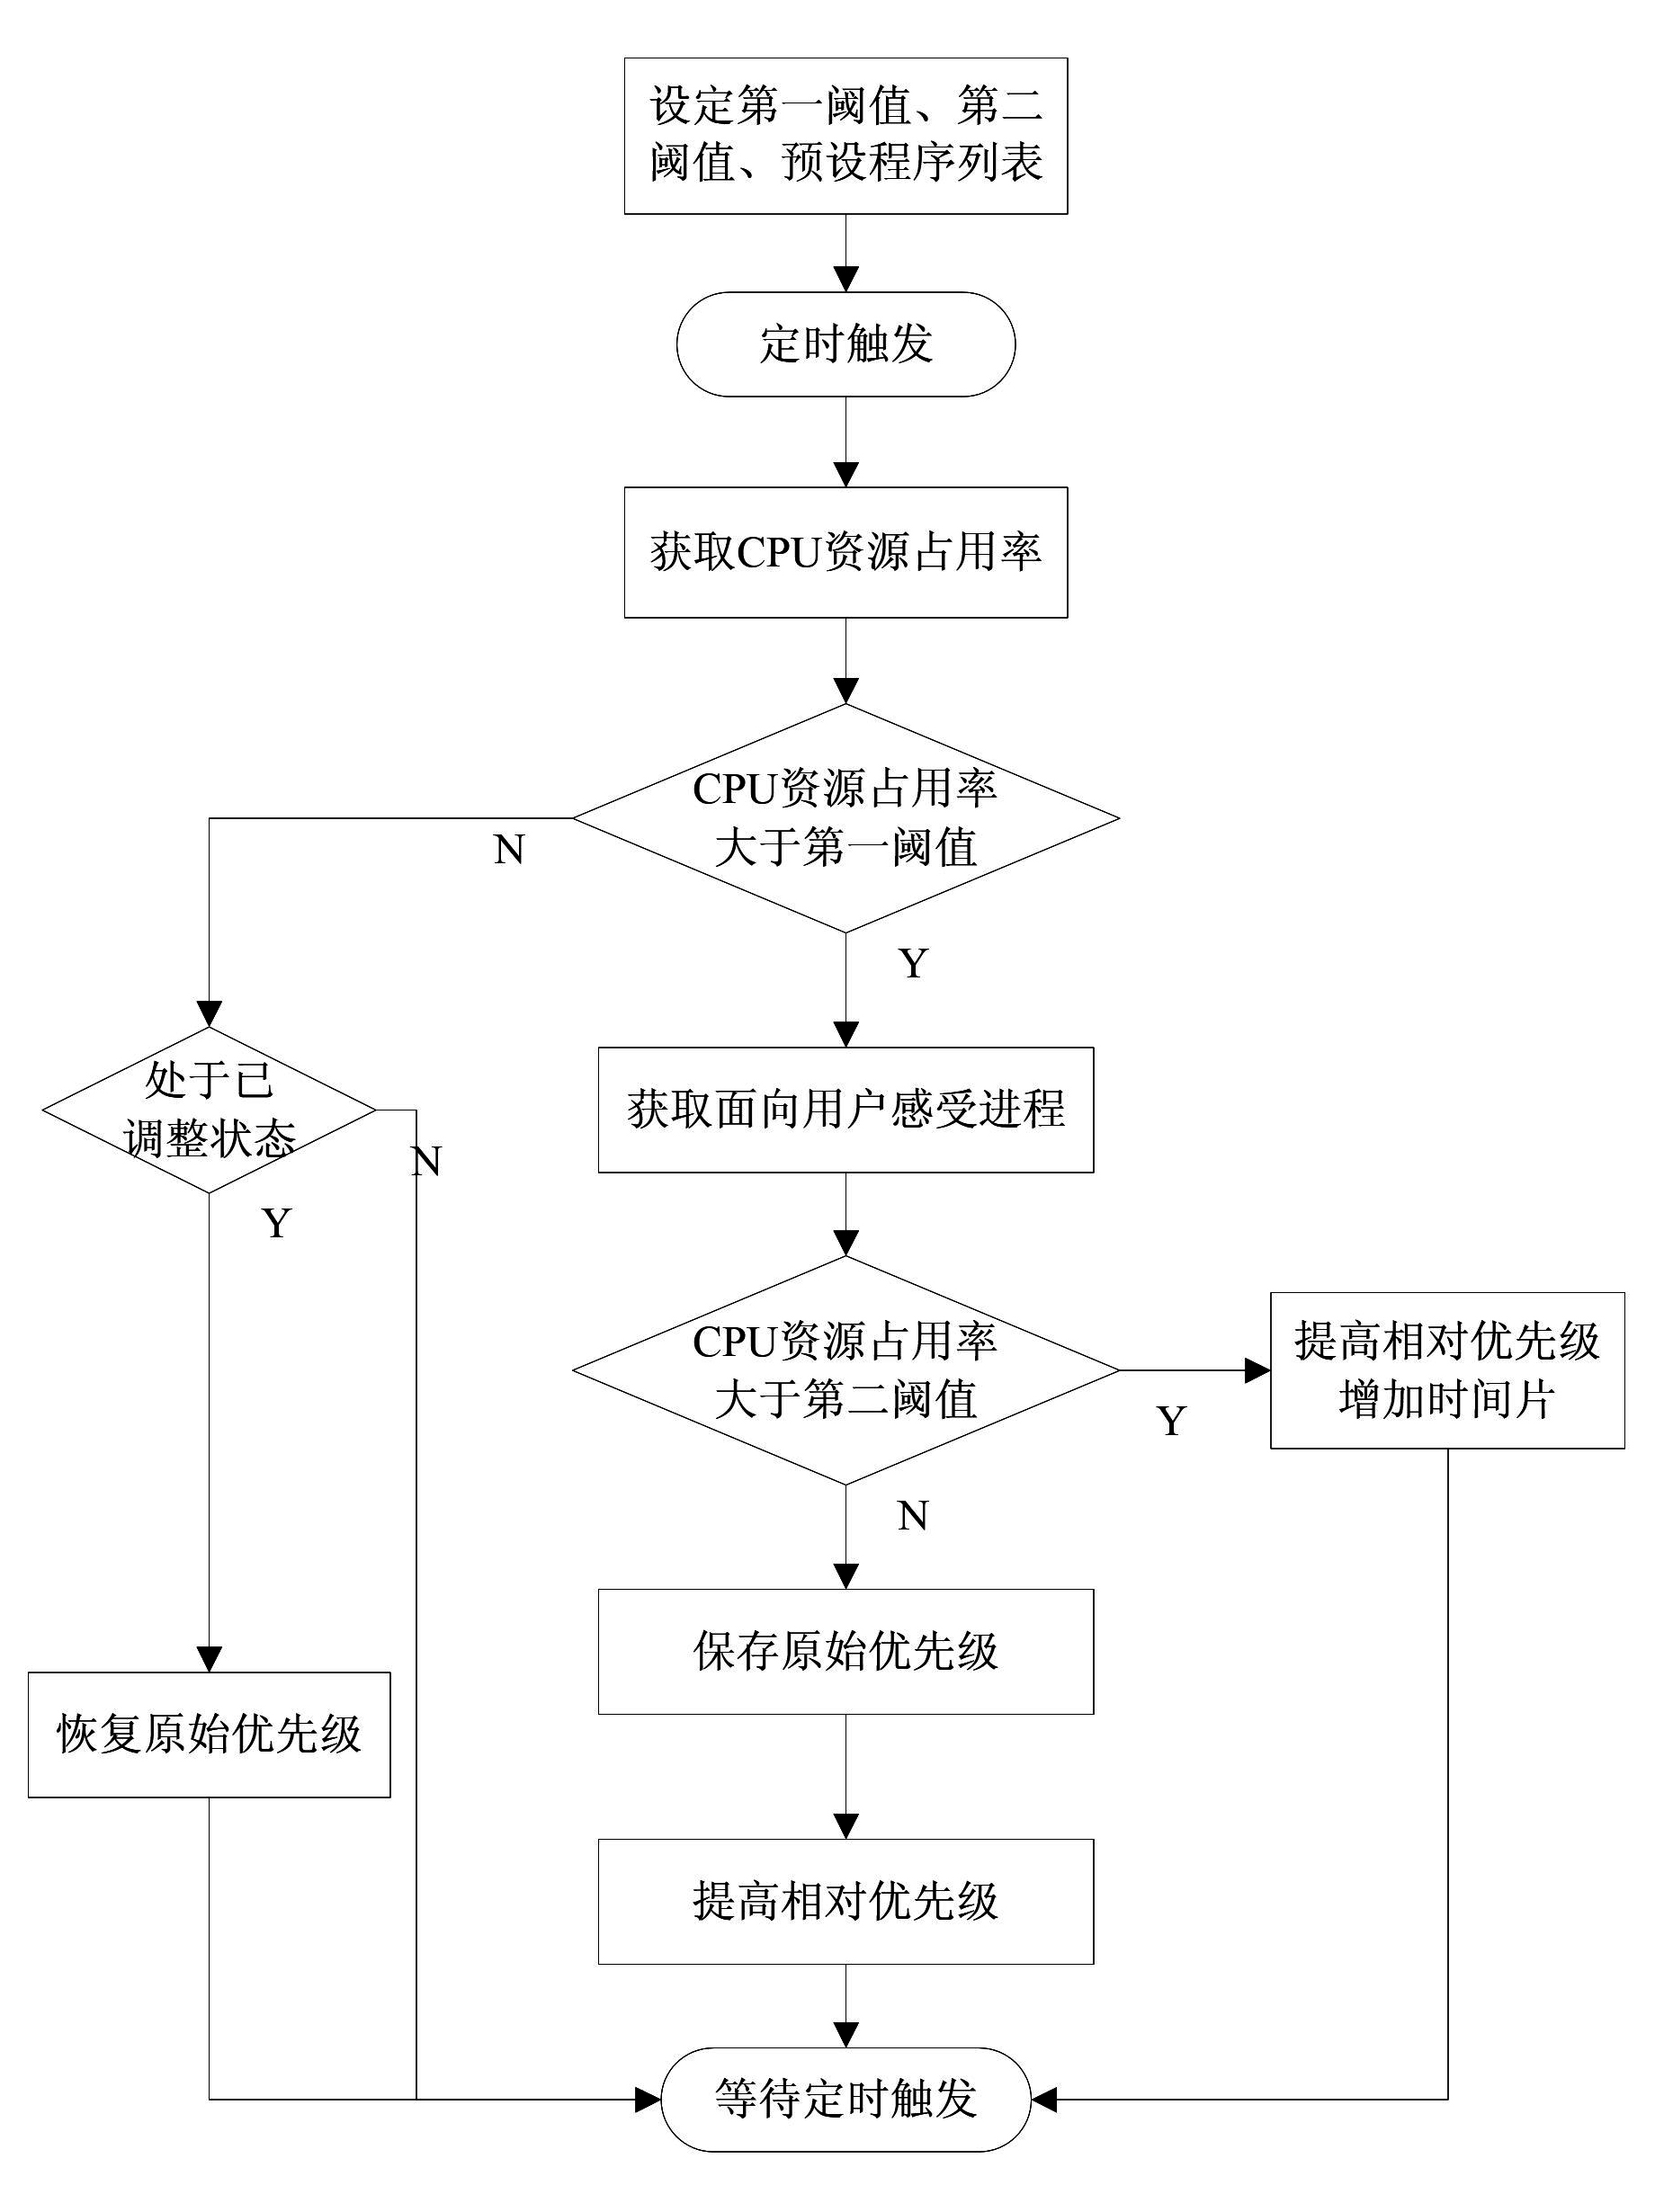 Process scheduling method and device for preventing screen jam of user interface in operating system